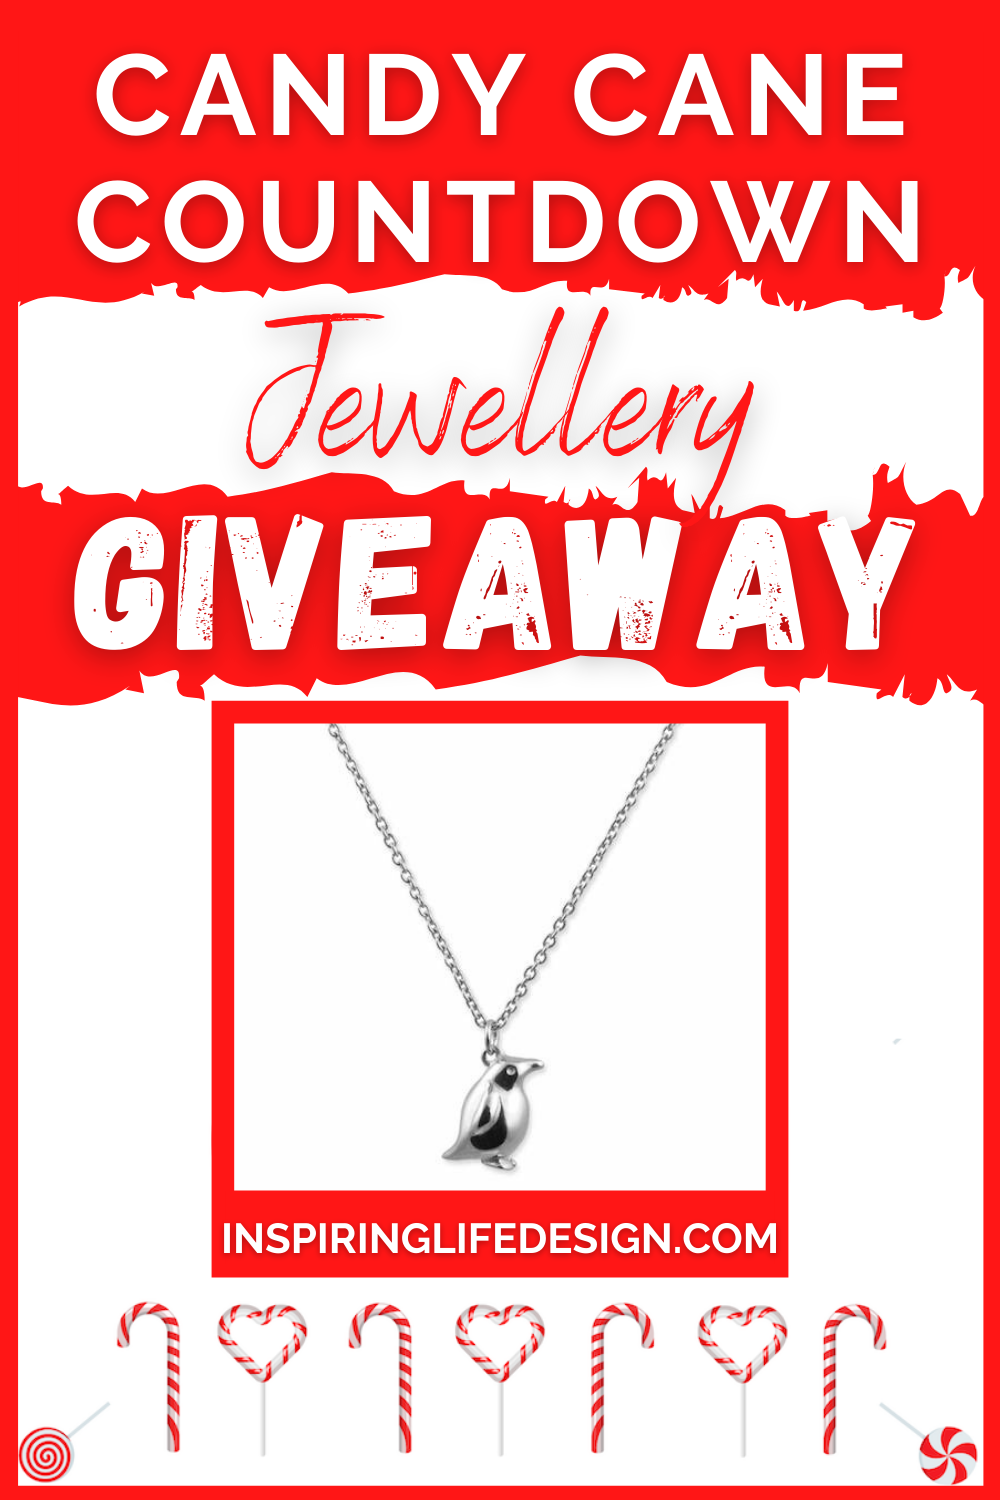 Candy Cane Countdown Jewellery Giveaway pinterest image